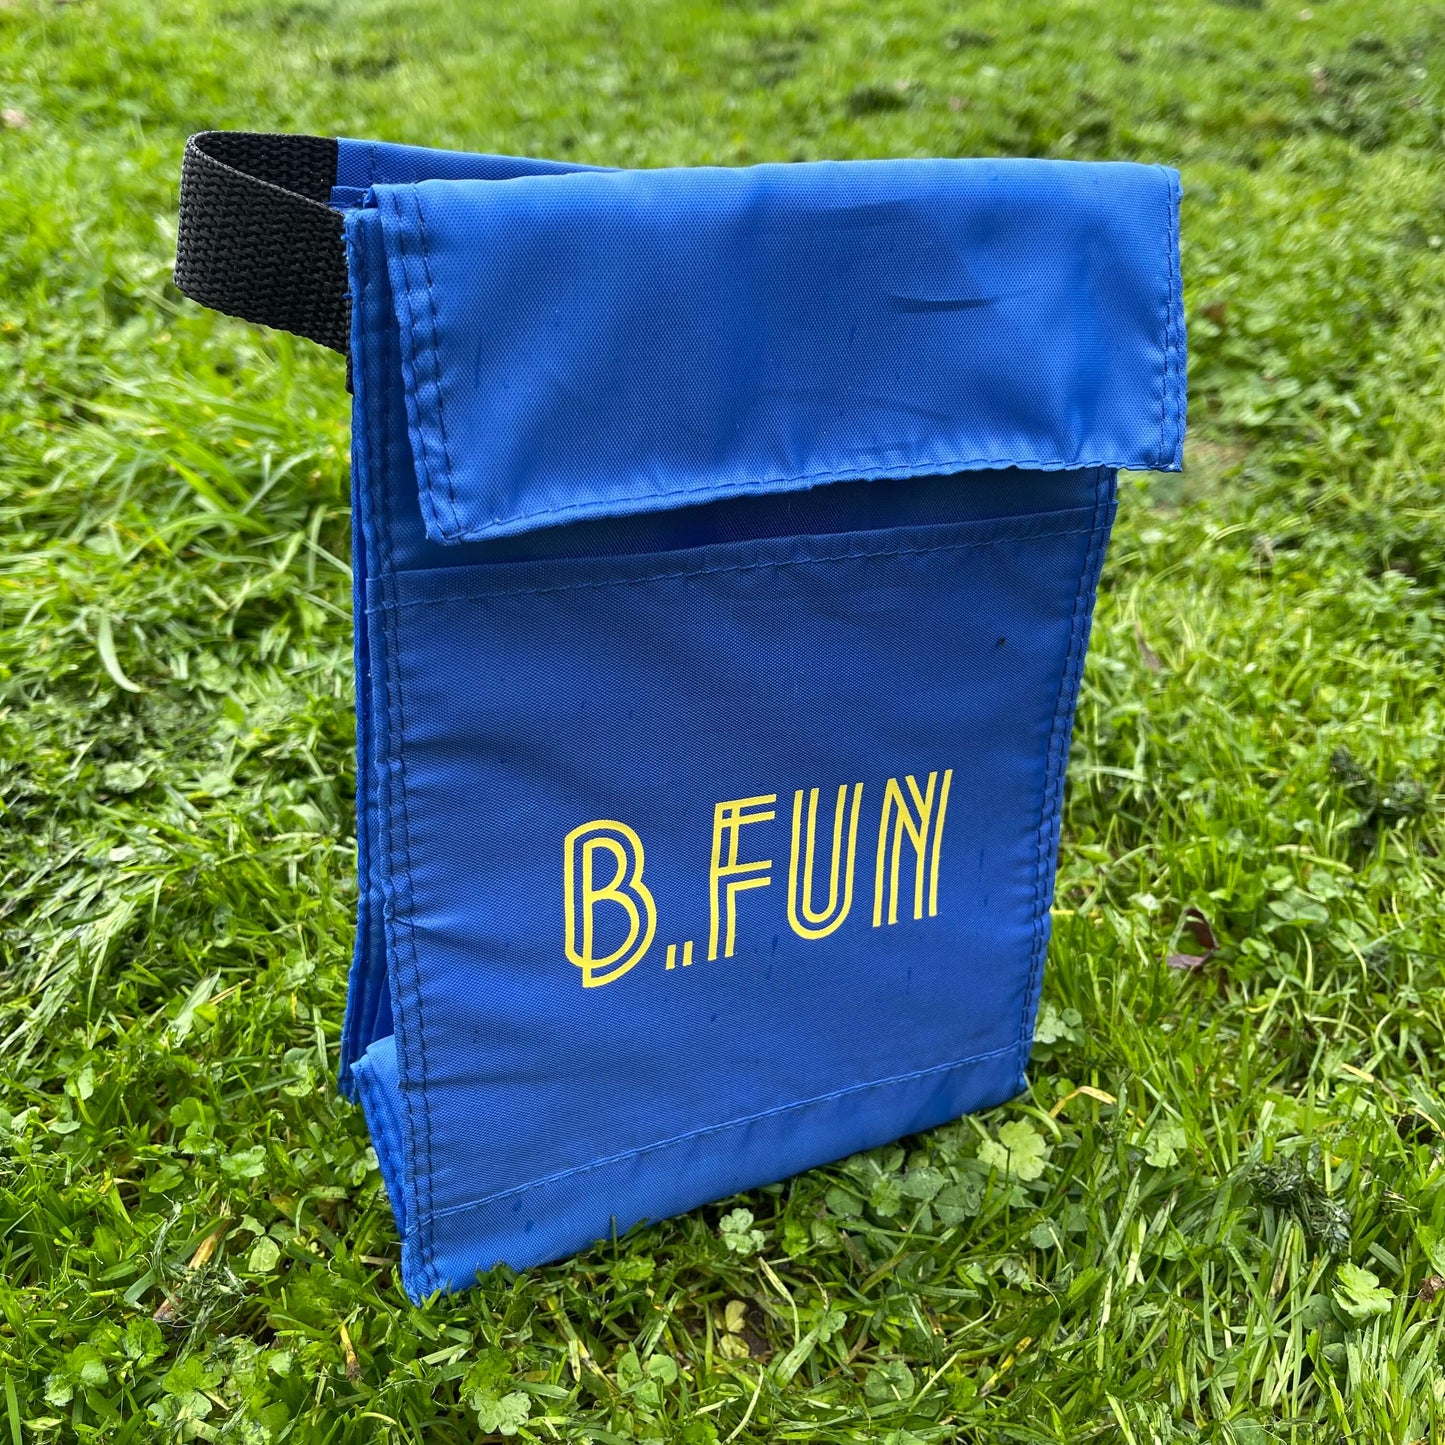 Insulated lunch carry bag in blue and in a small size.